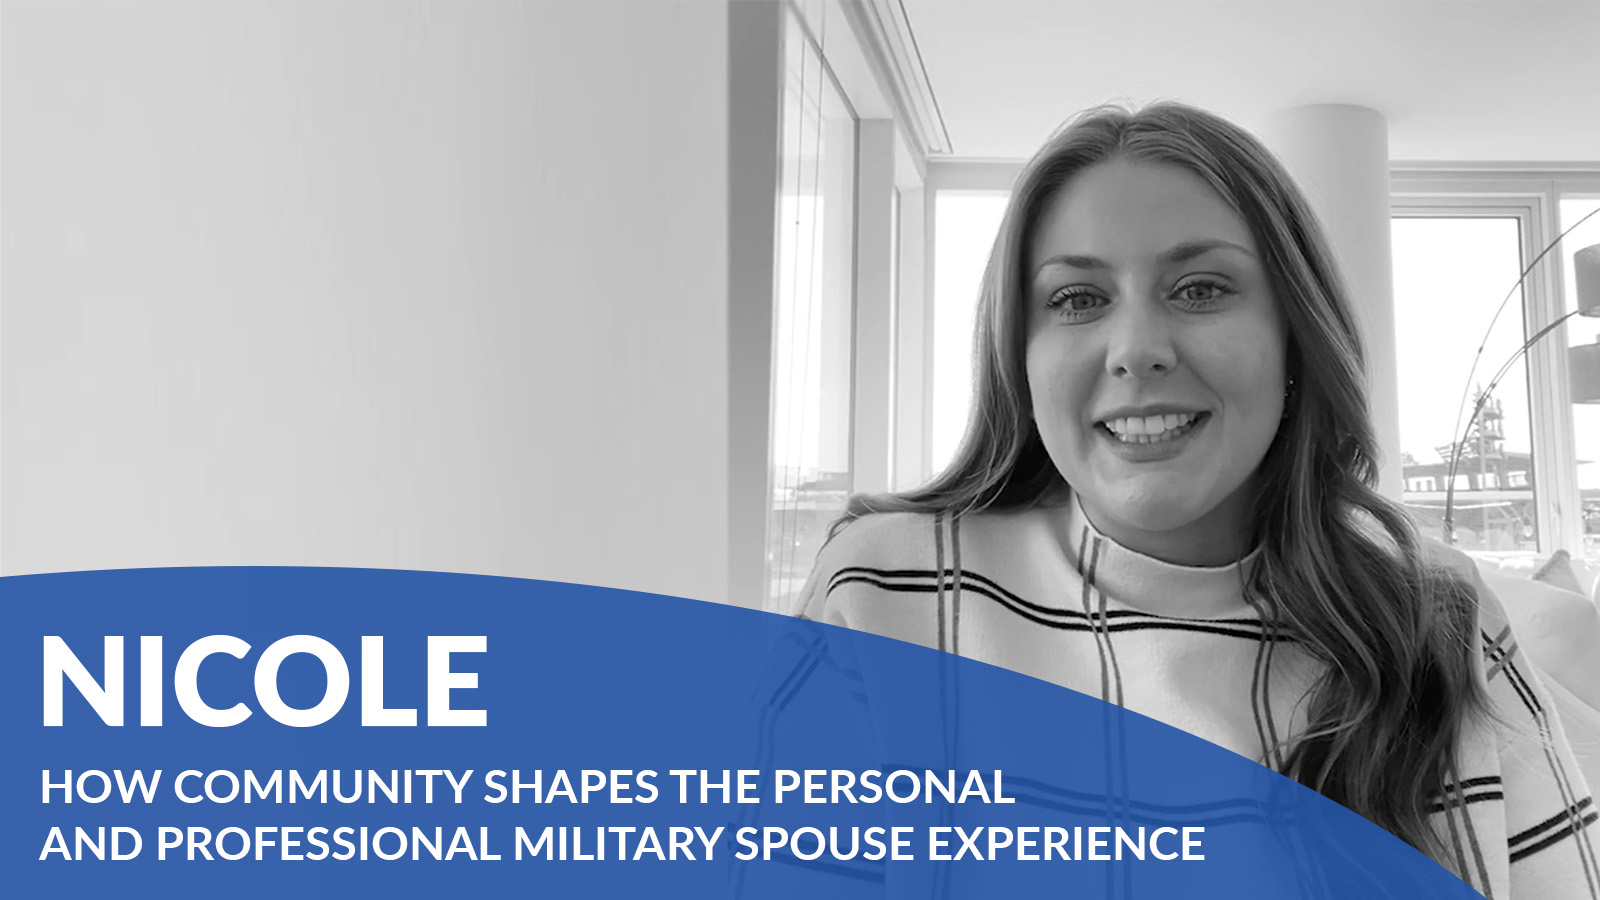 nicole's story - how community shapes the personal and professional military spouse experience